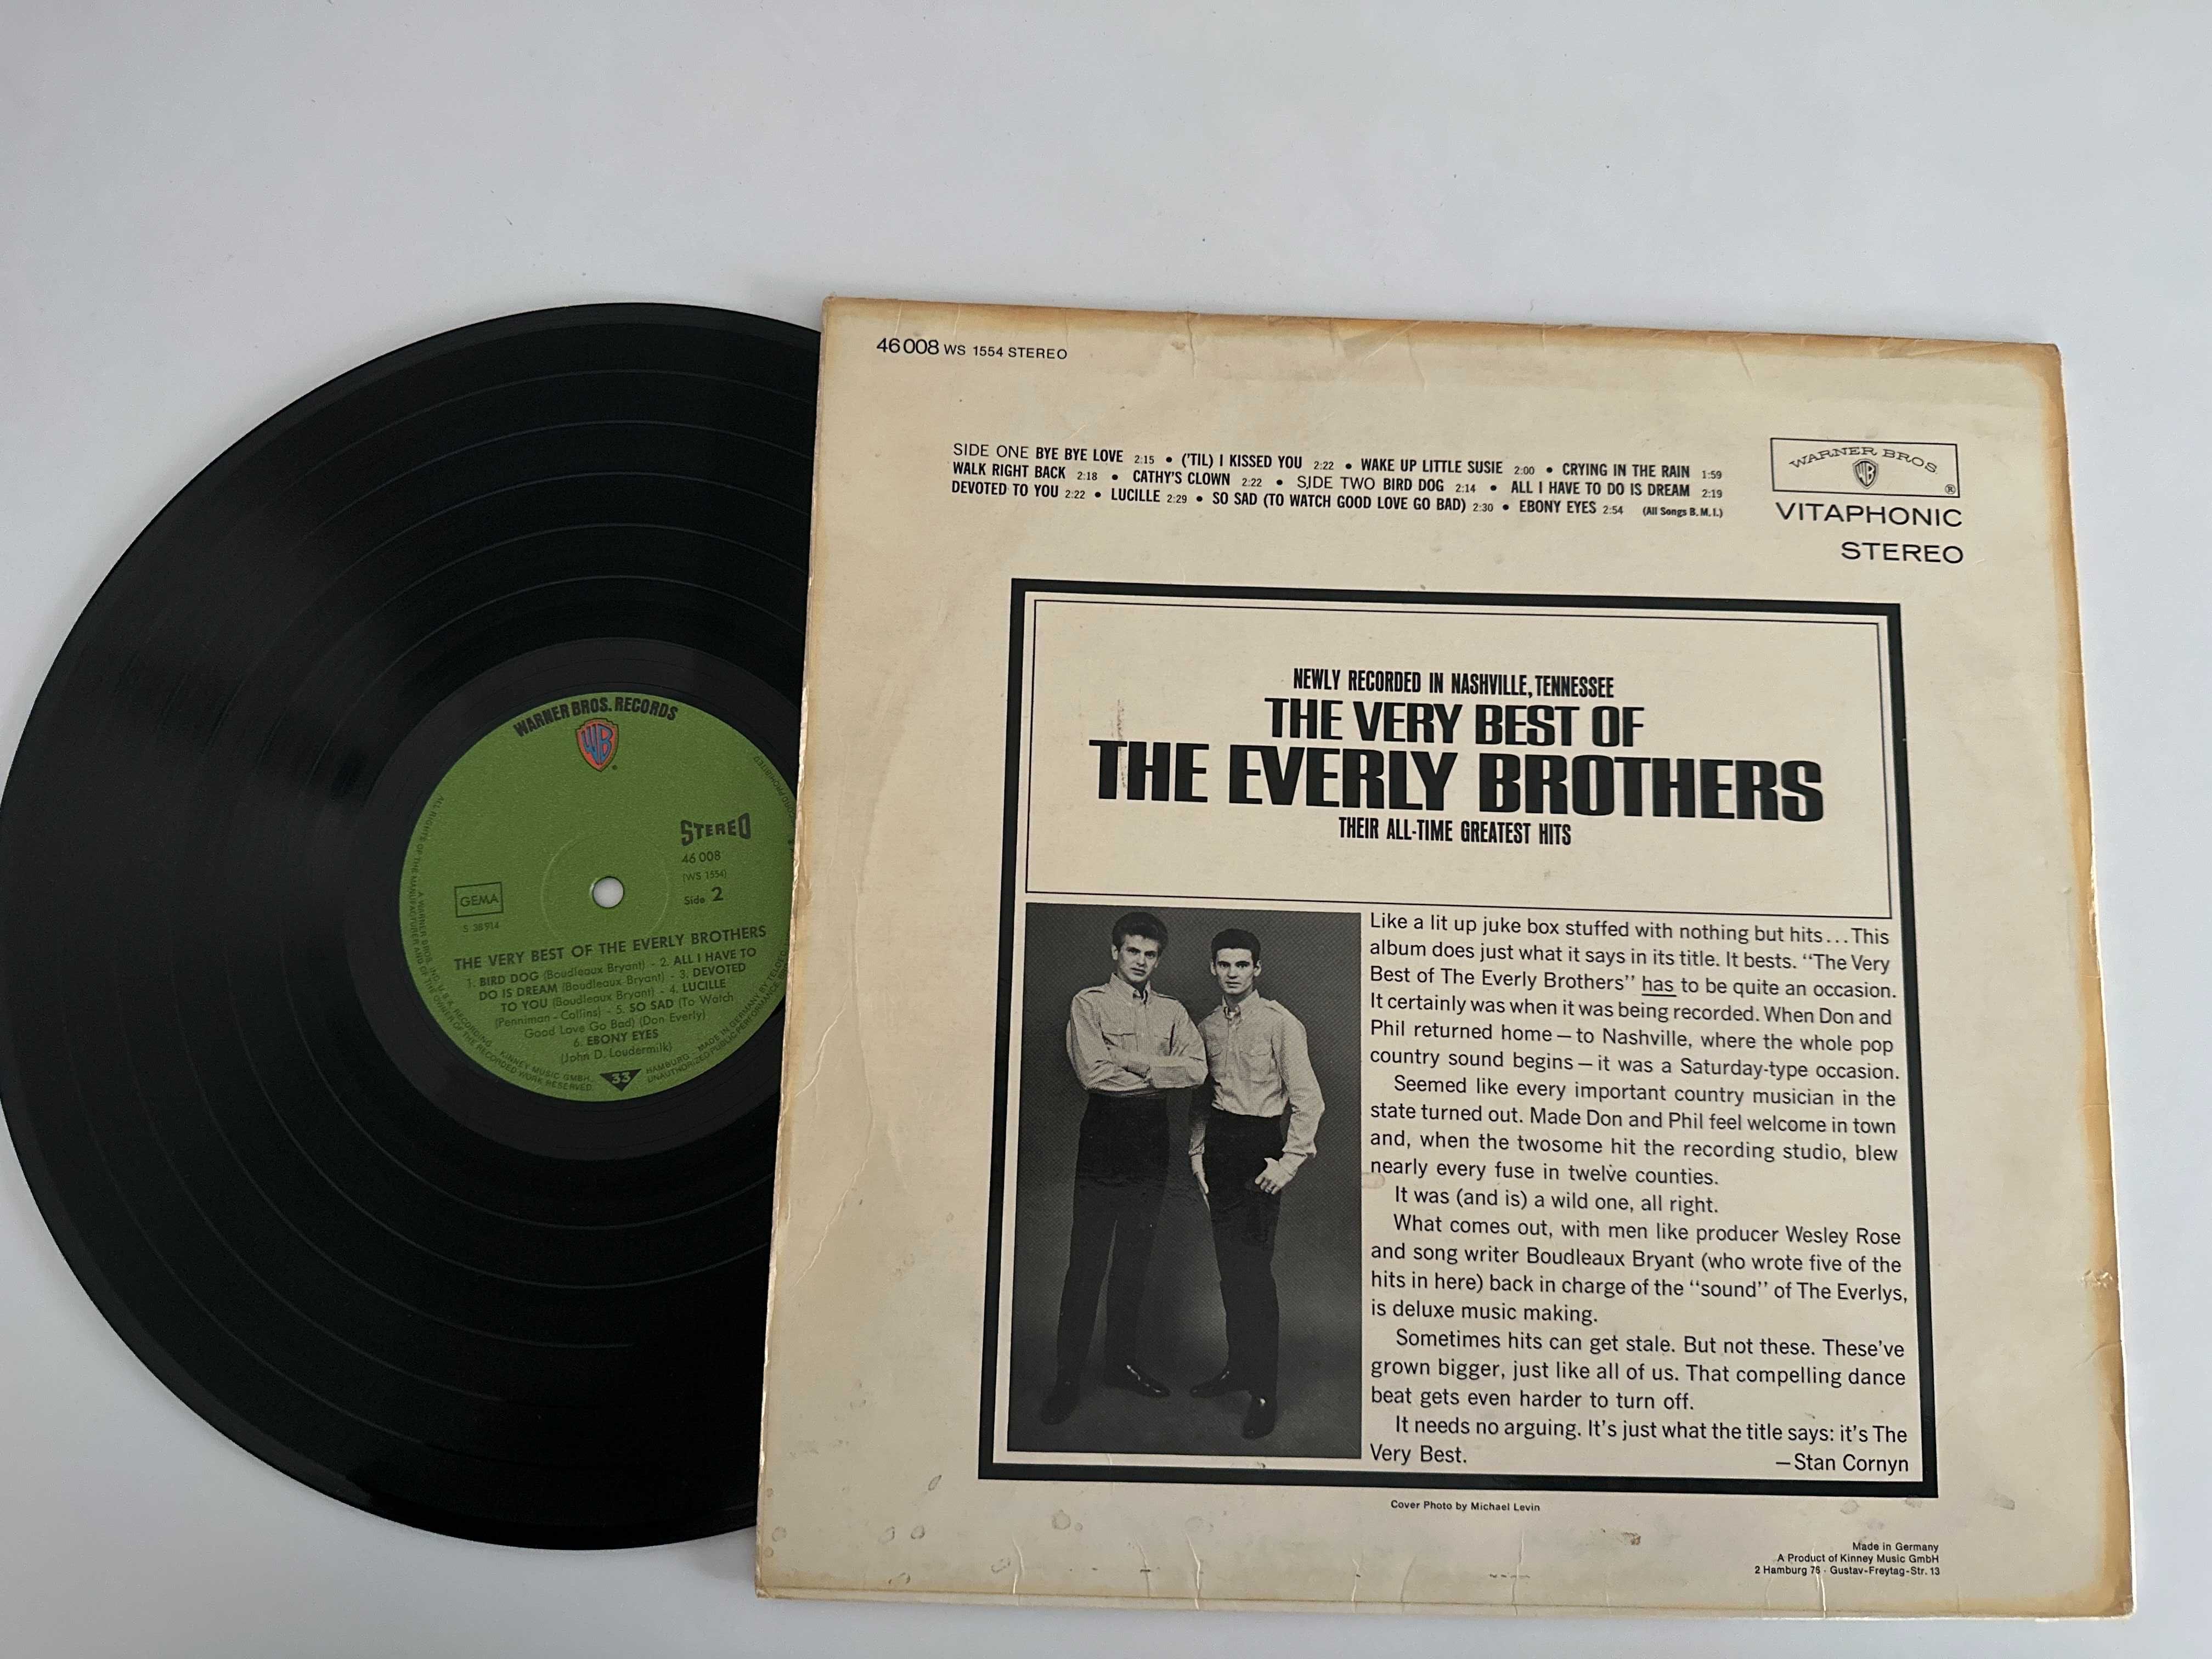 The Everly Brothers – The Very Best Of The Everly Brothers LP (A-149)